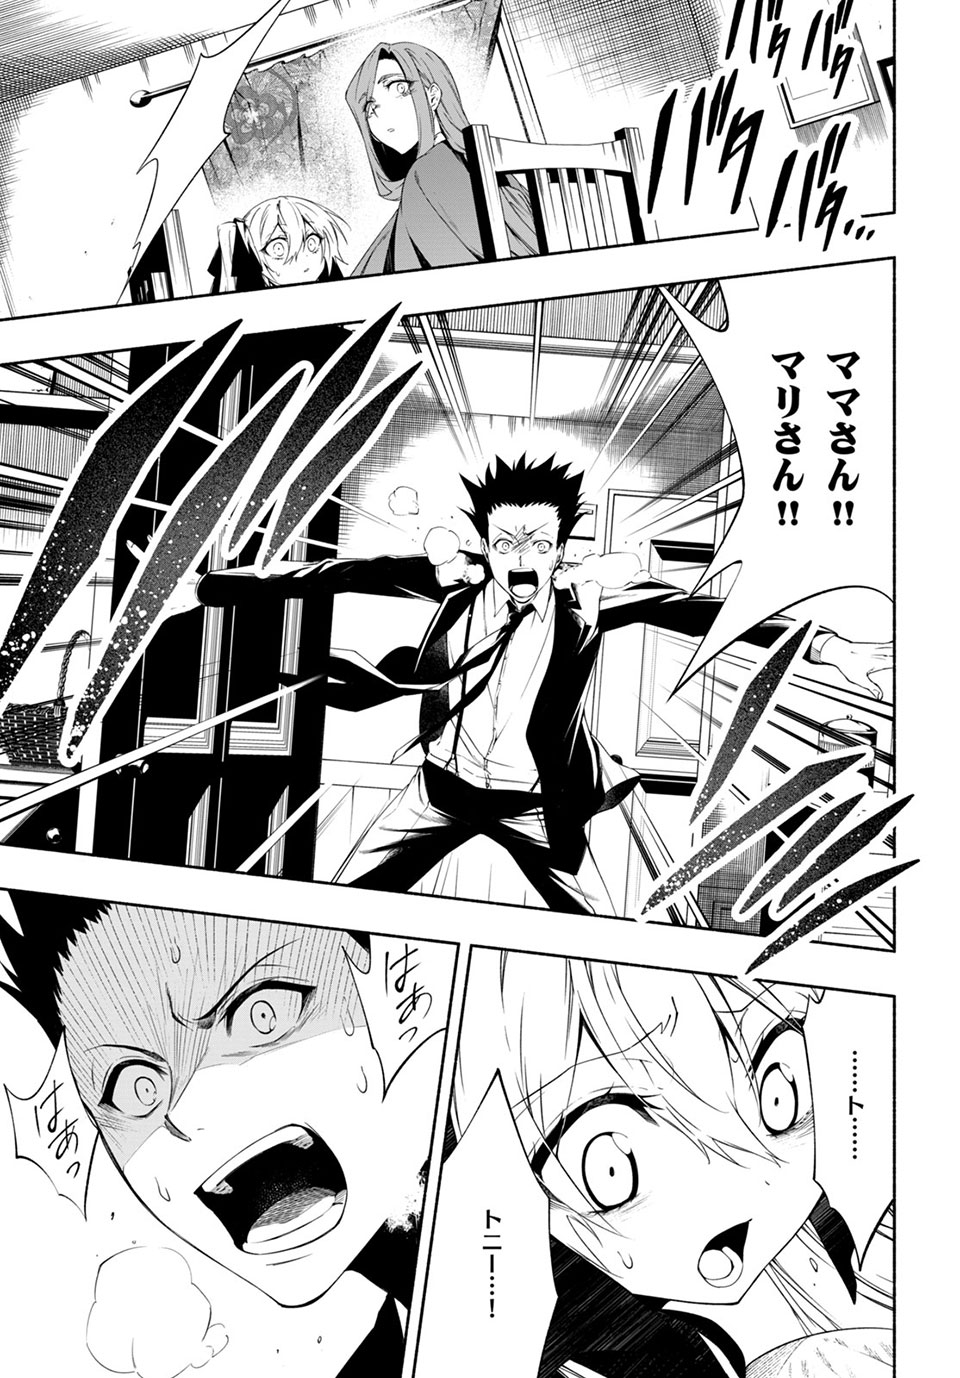 Shaman King: and a garden 第13.3話 - Page 5